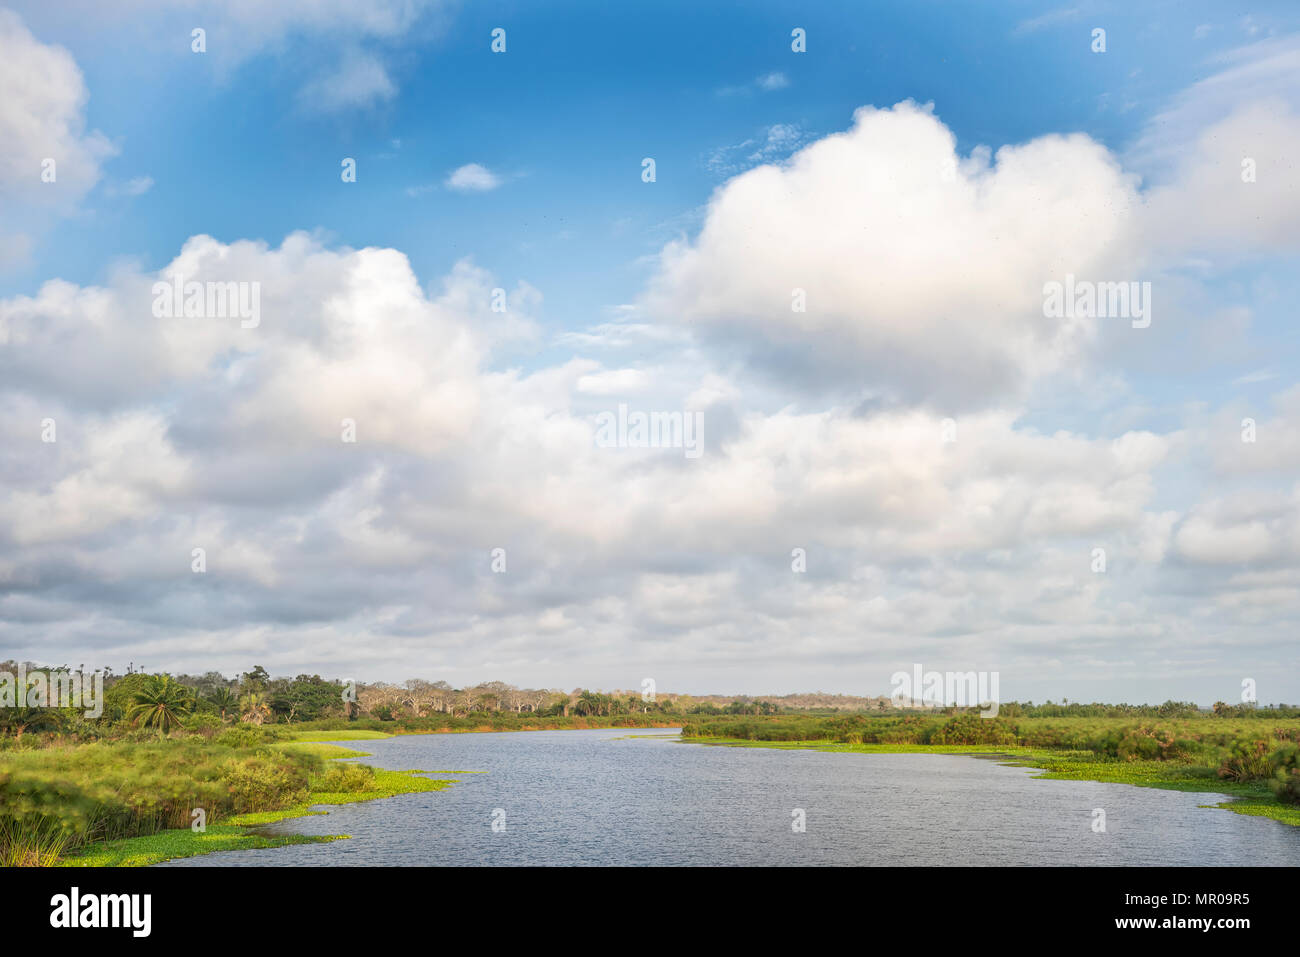 View of the kwanza river. Angola, Africa. Stock Photo